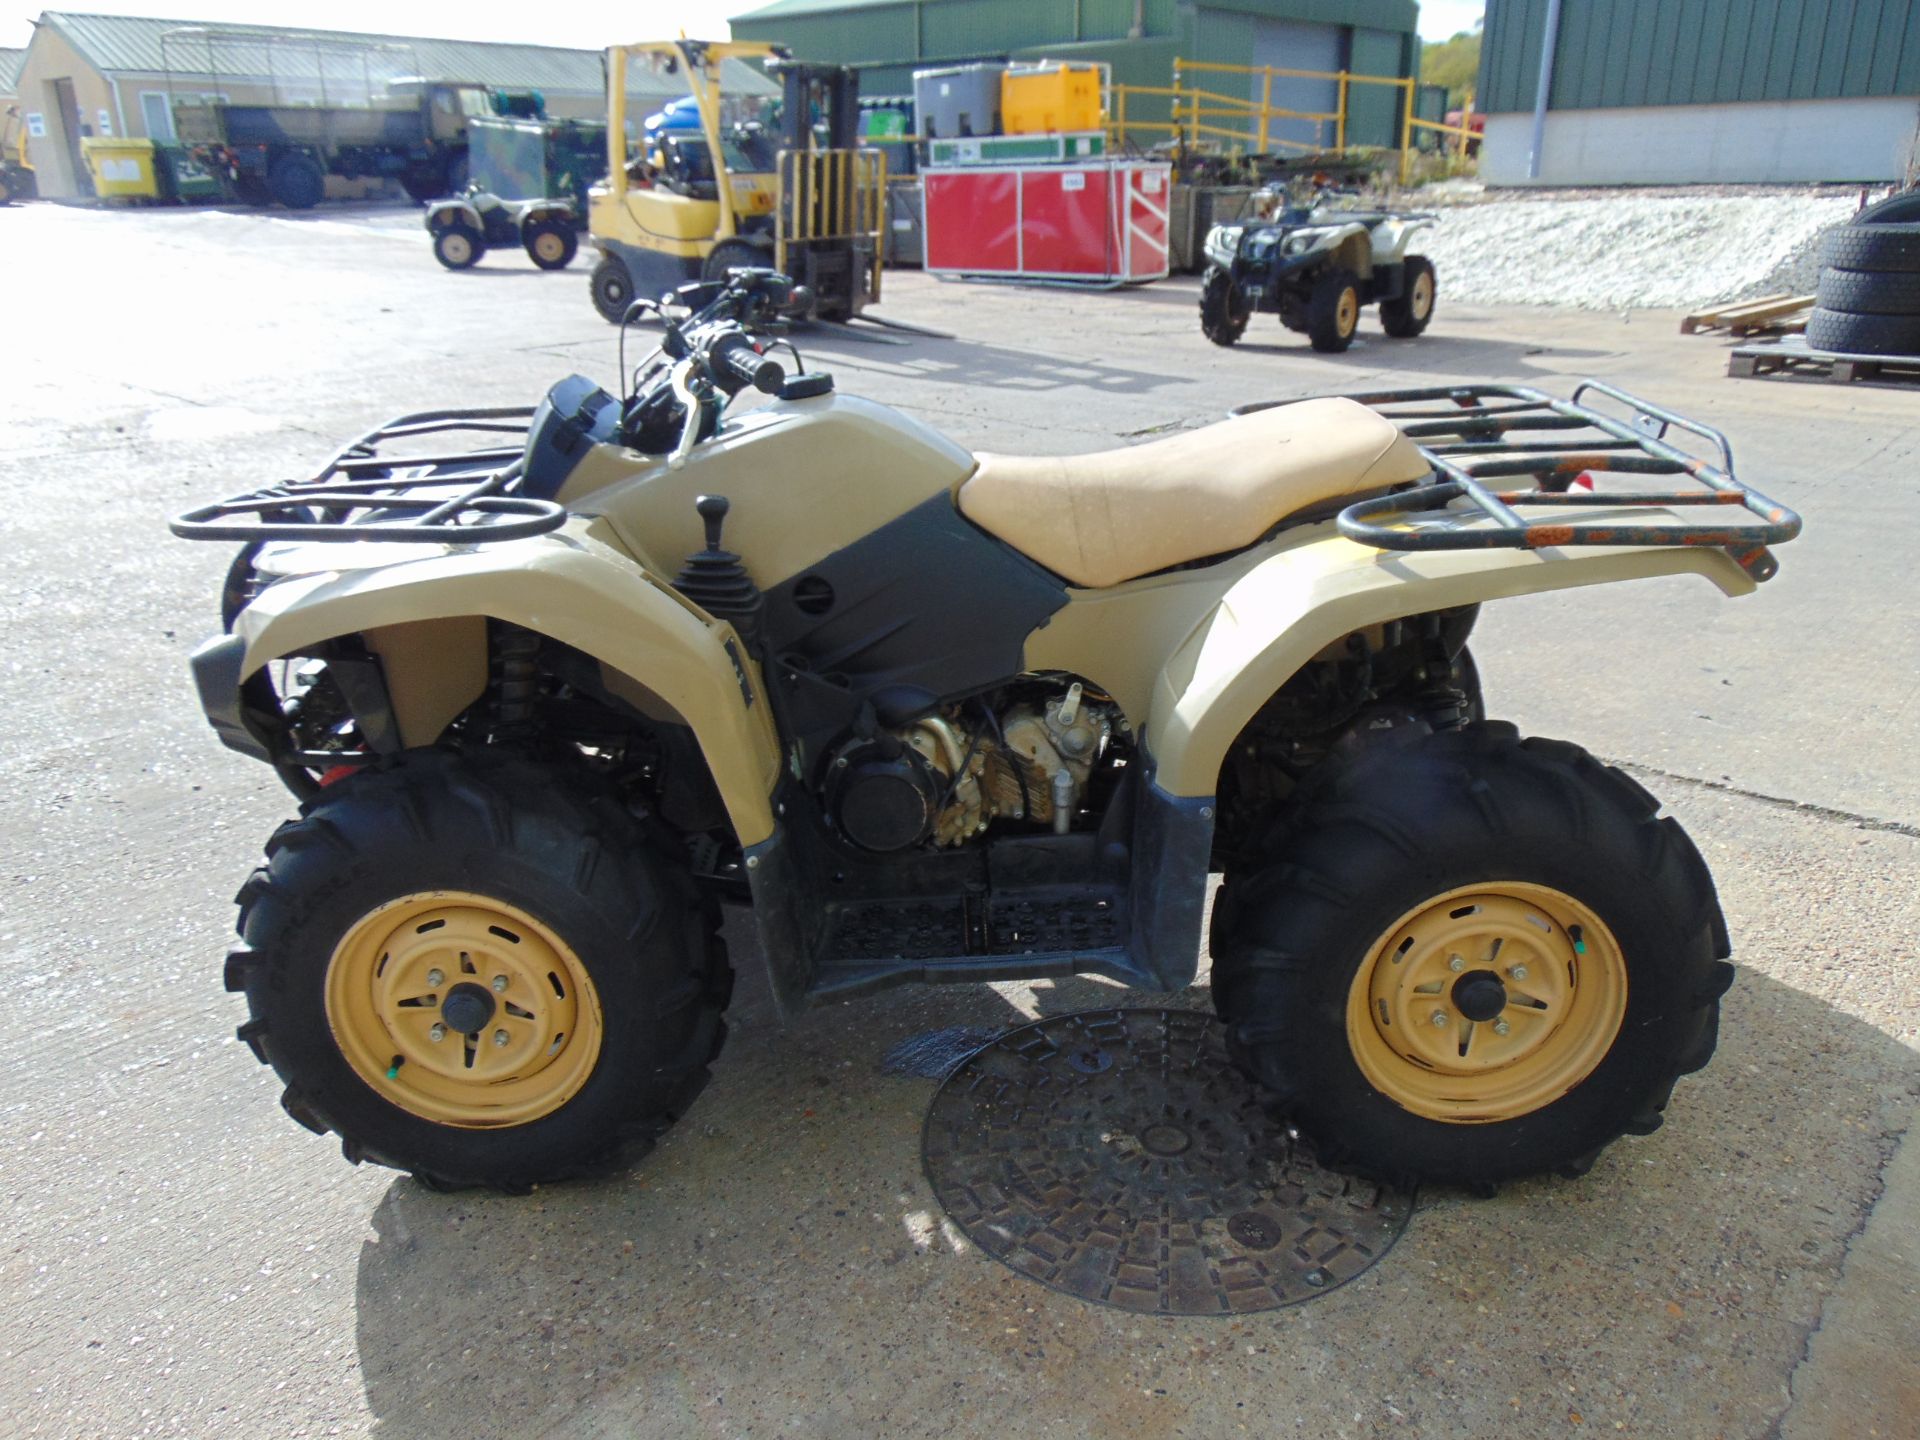 Military Specification Yamaha Grizzly 450 4 x 4 ATV Quad Bike - Image 4 of 14